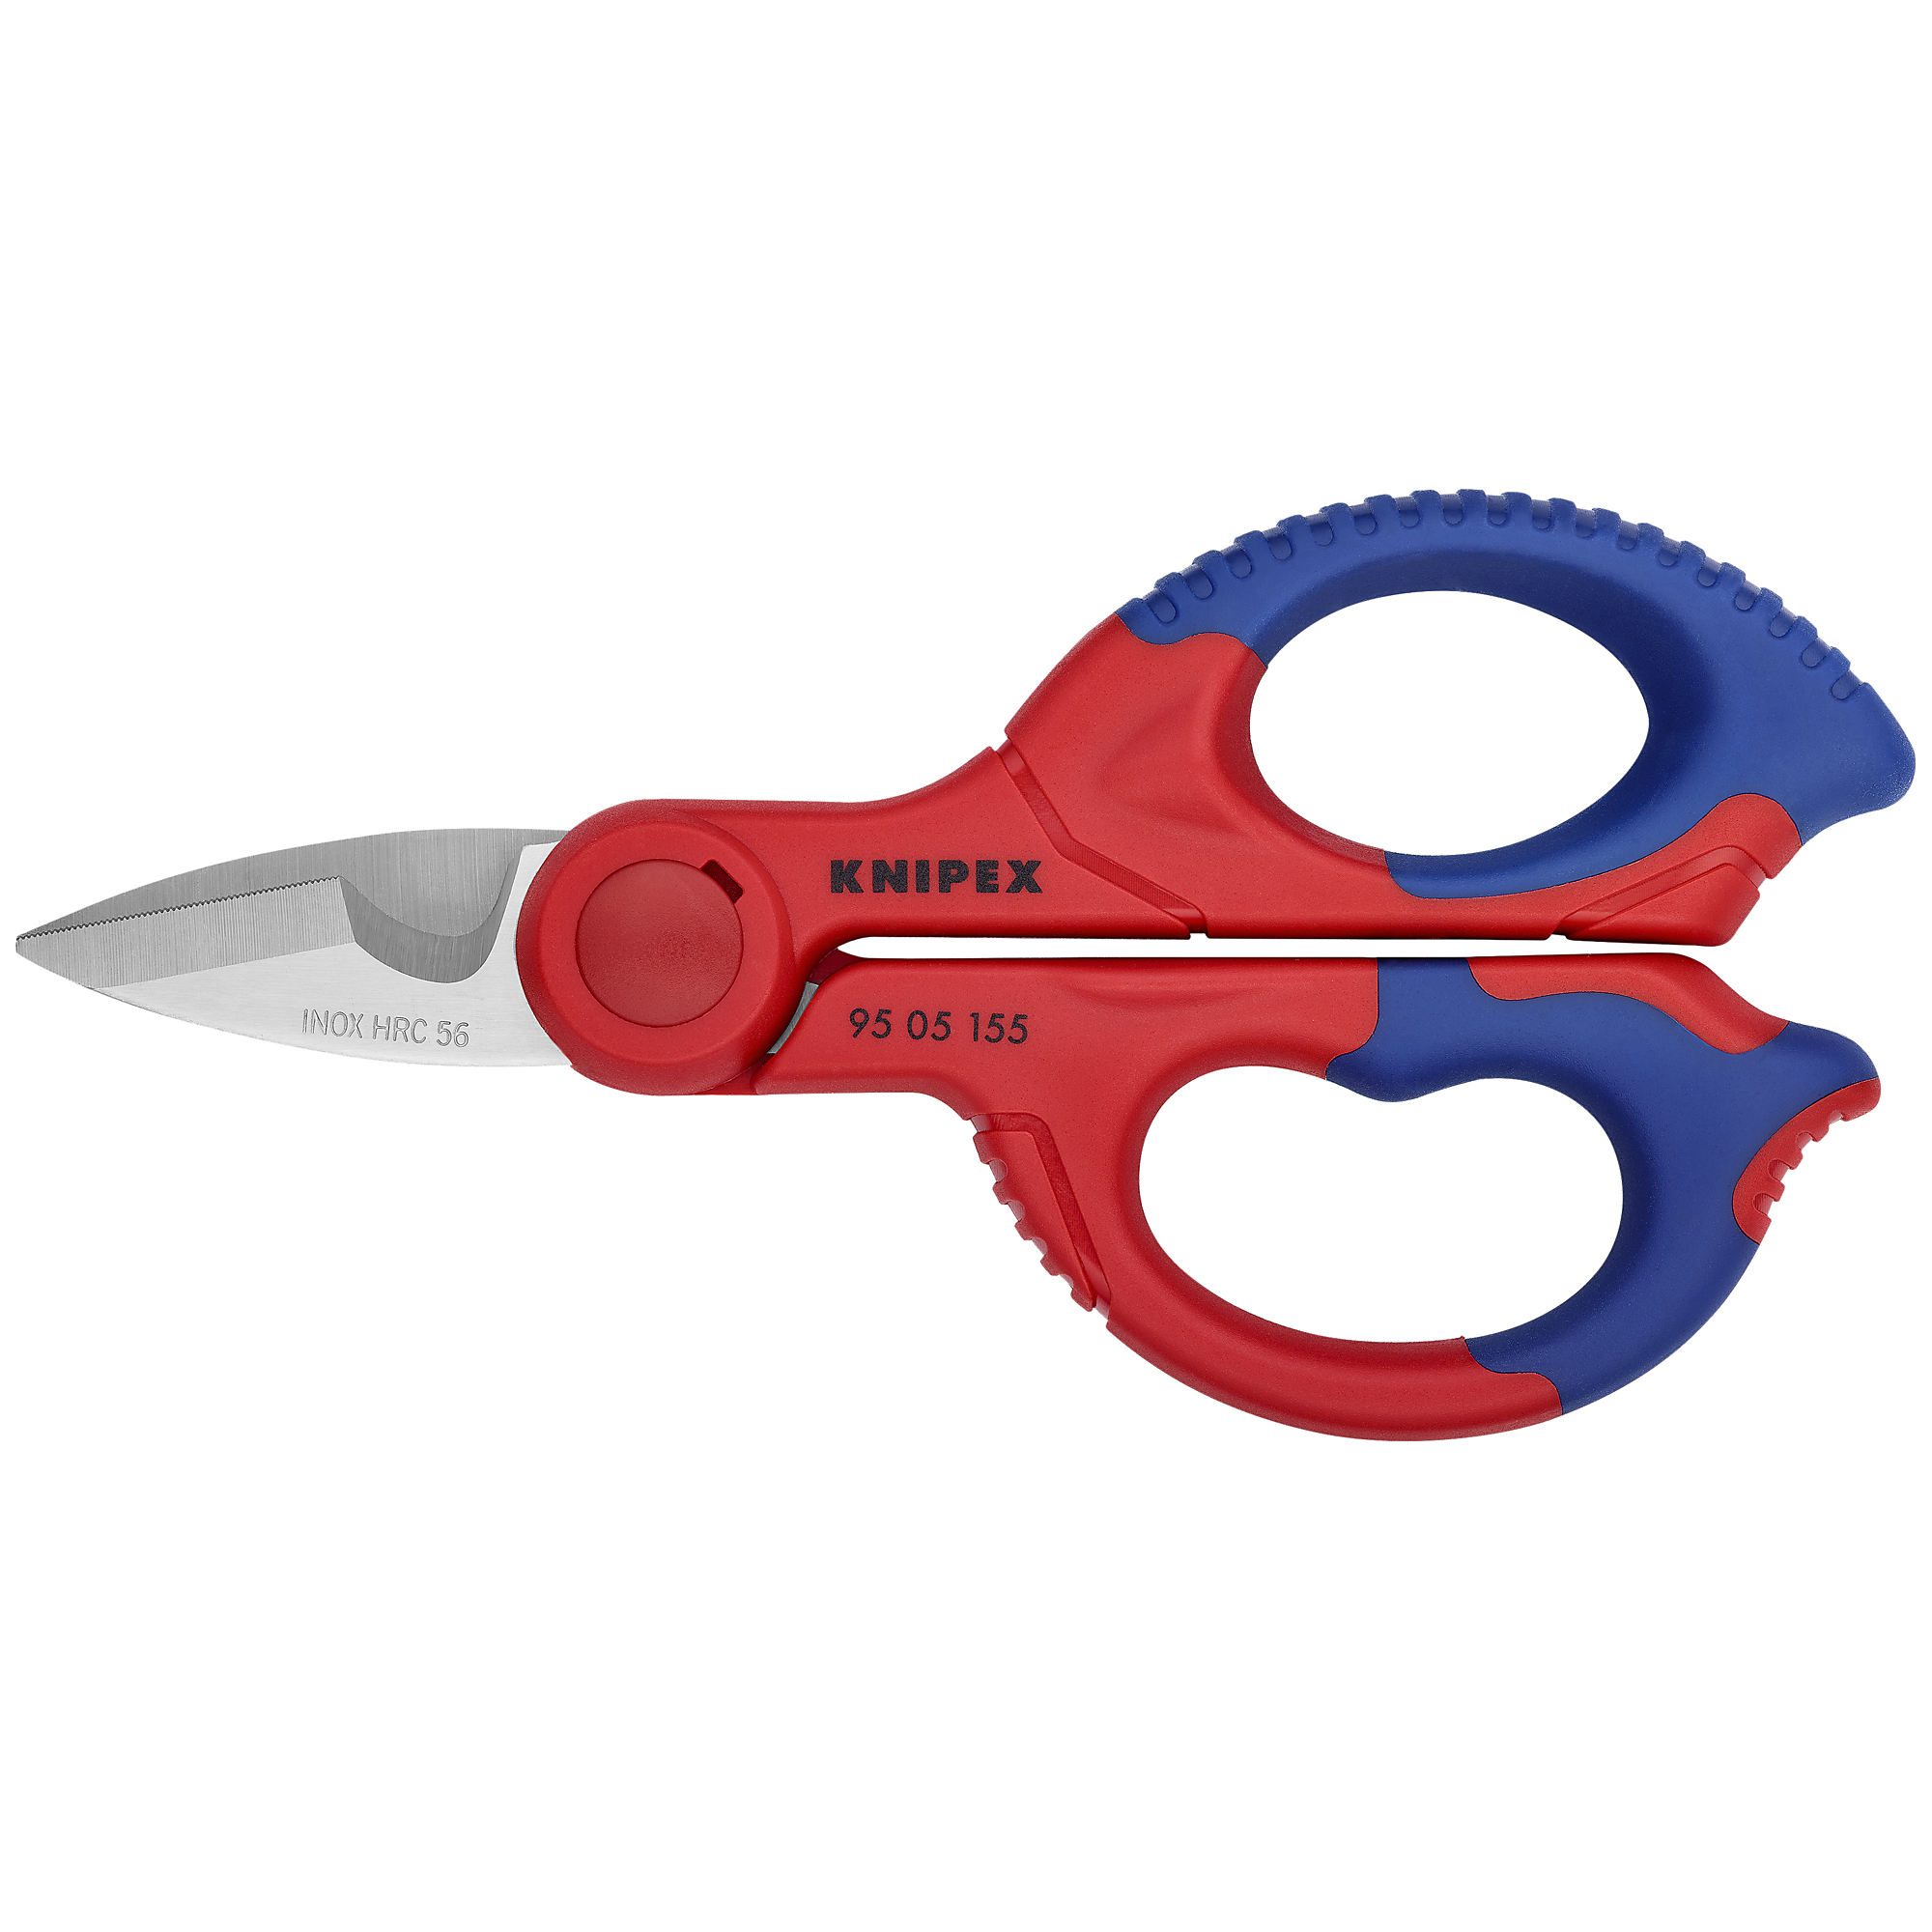 KNIPEX, Electricians' Shears, Comfort grip, 6.25Inch, Pieces (qty.) 1 Material Steel, Model 95 05 155 SBA